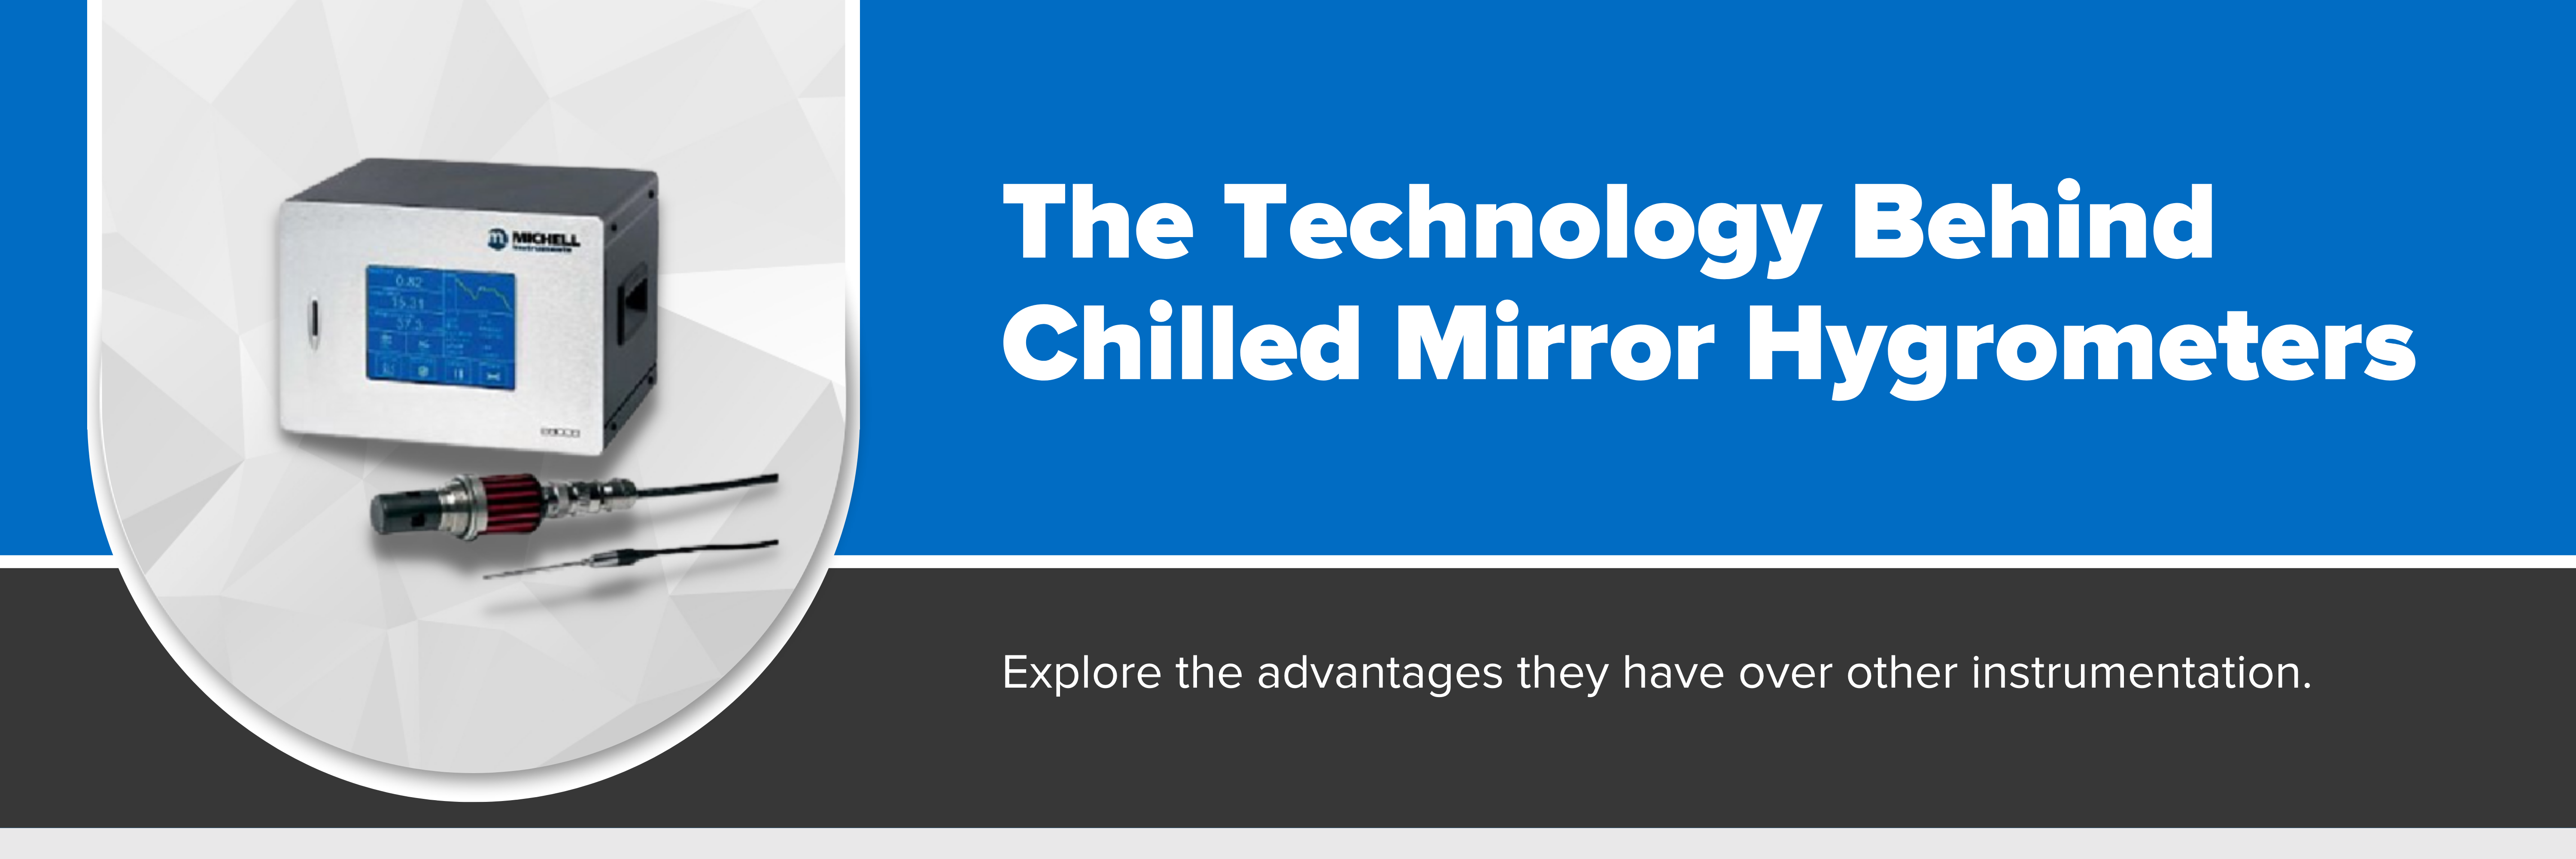 Header image with text "The Technology Behind Chilled Mirror Hygrometers"